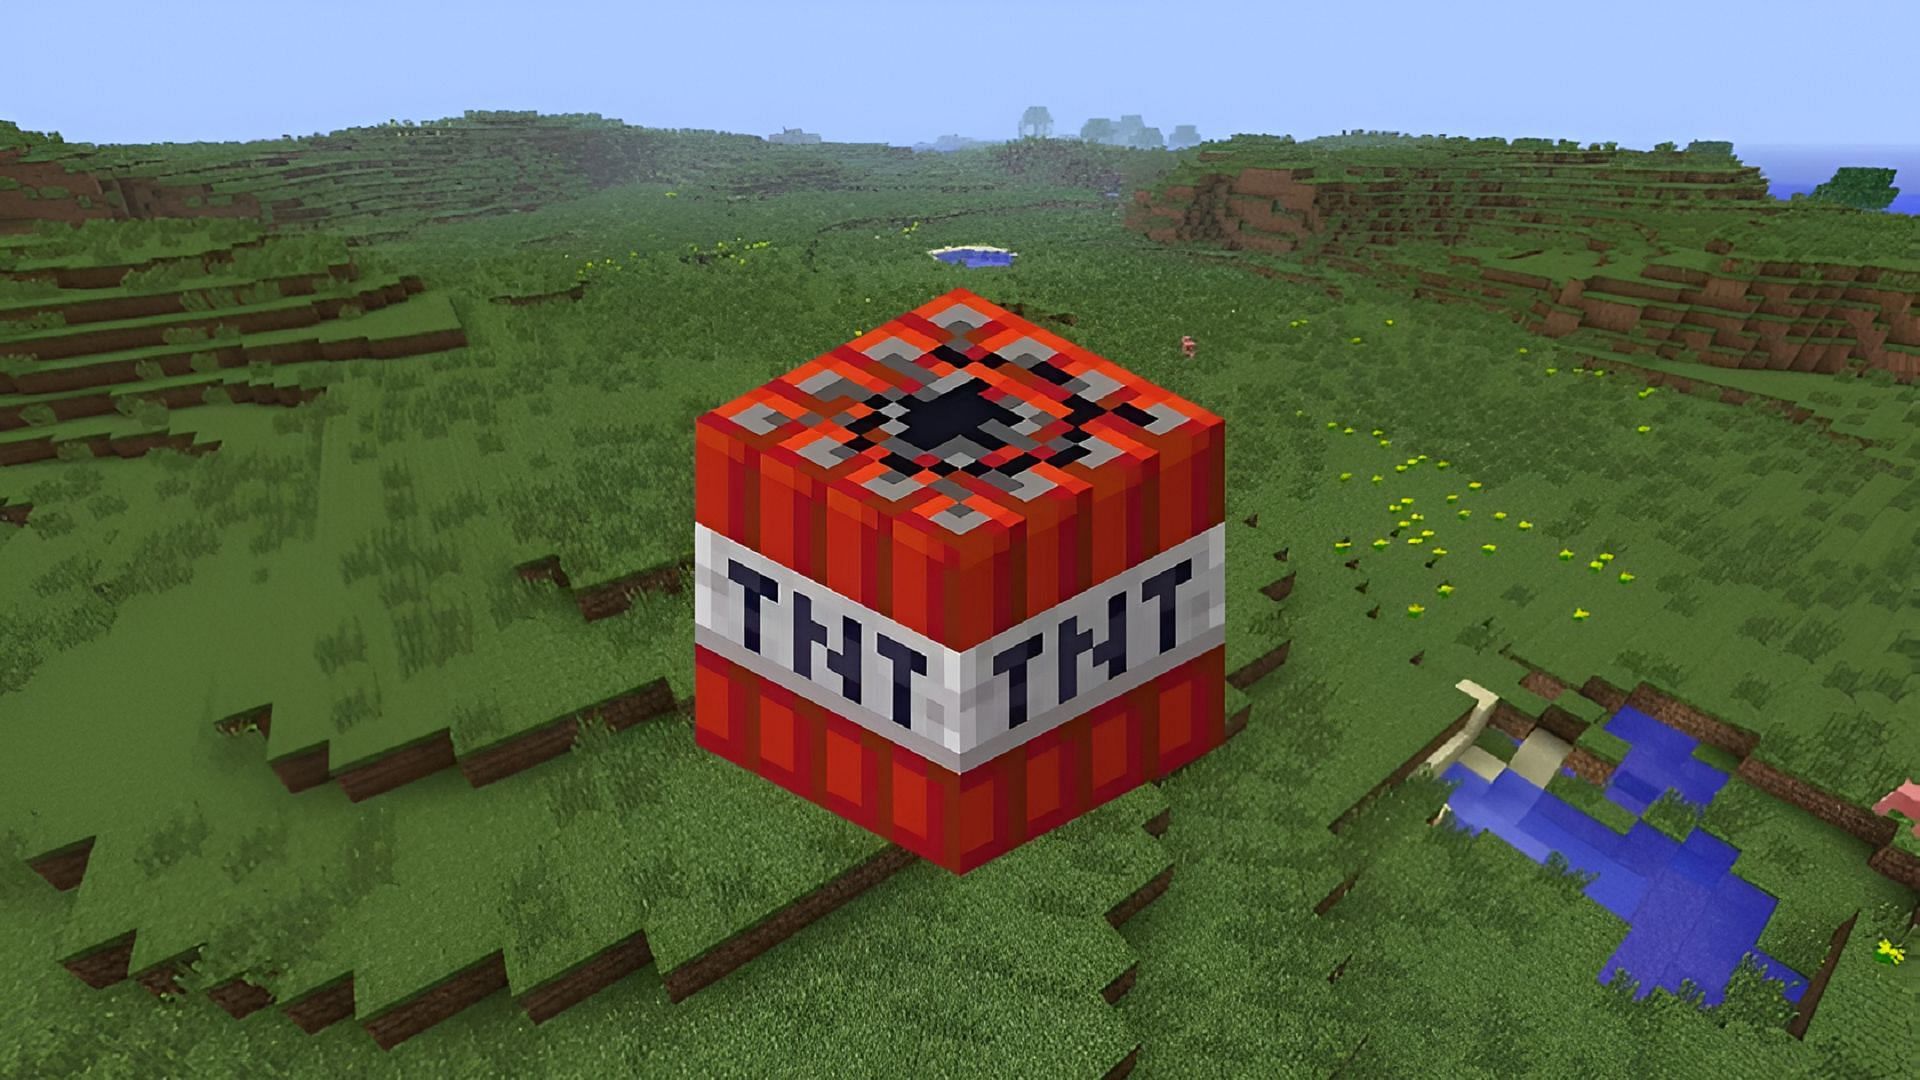 One Minecraft player decided to create a particularly big bang in their world (Image via Mojang)